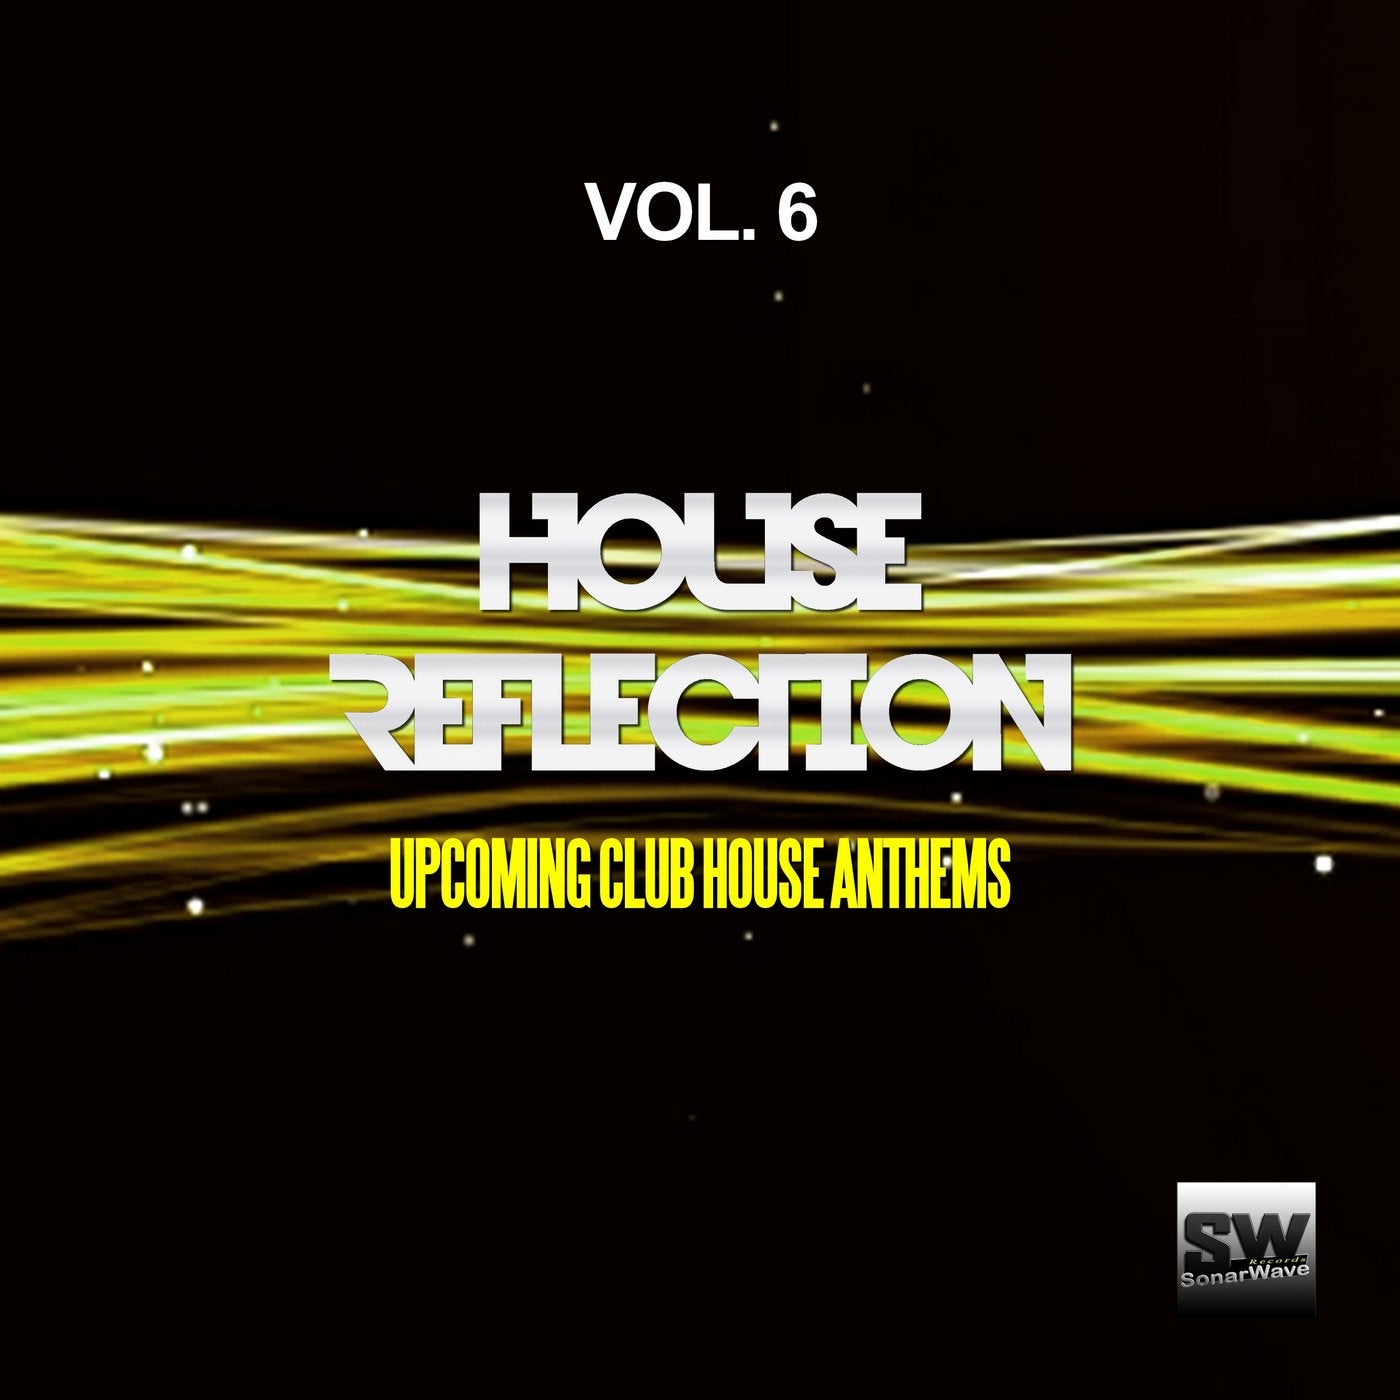 House Reflection, Vol. 6 (Upcoming Club House Anthems)